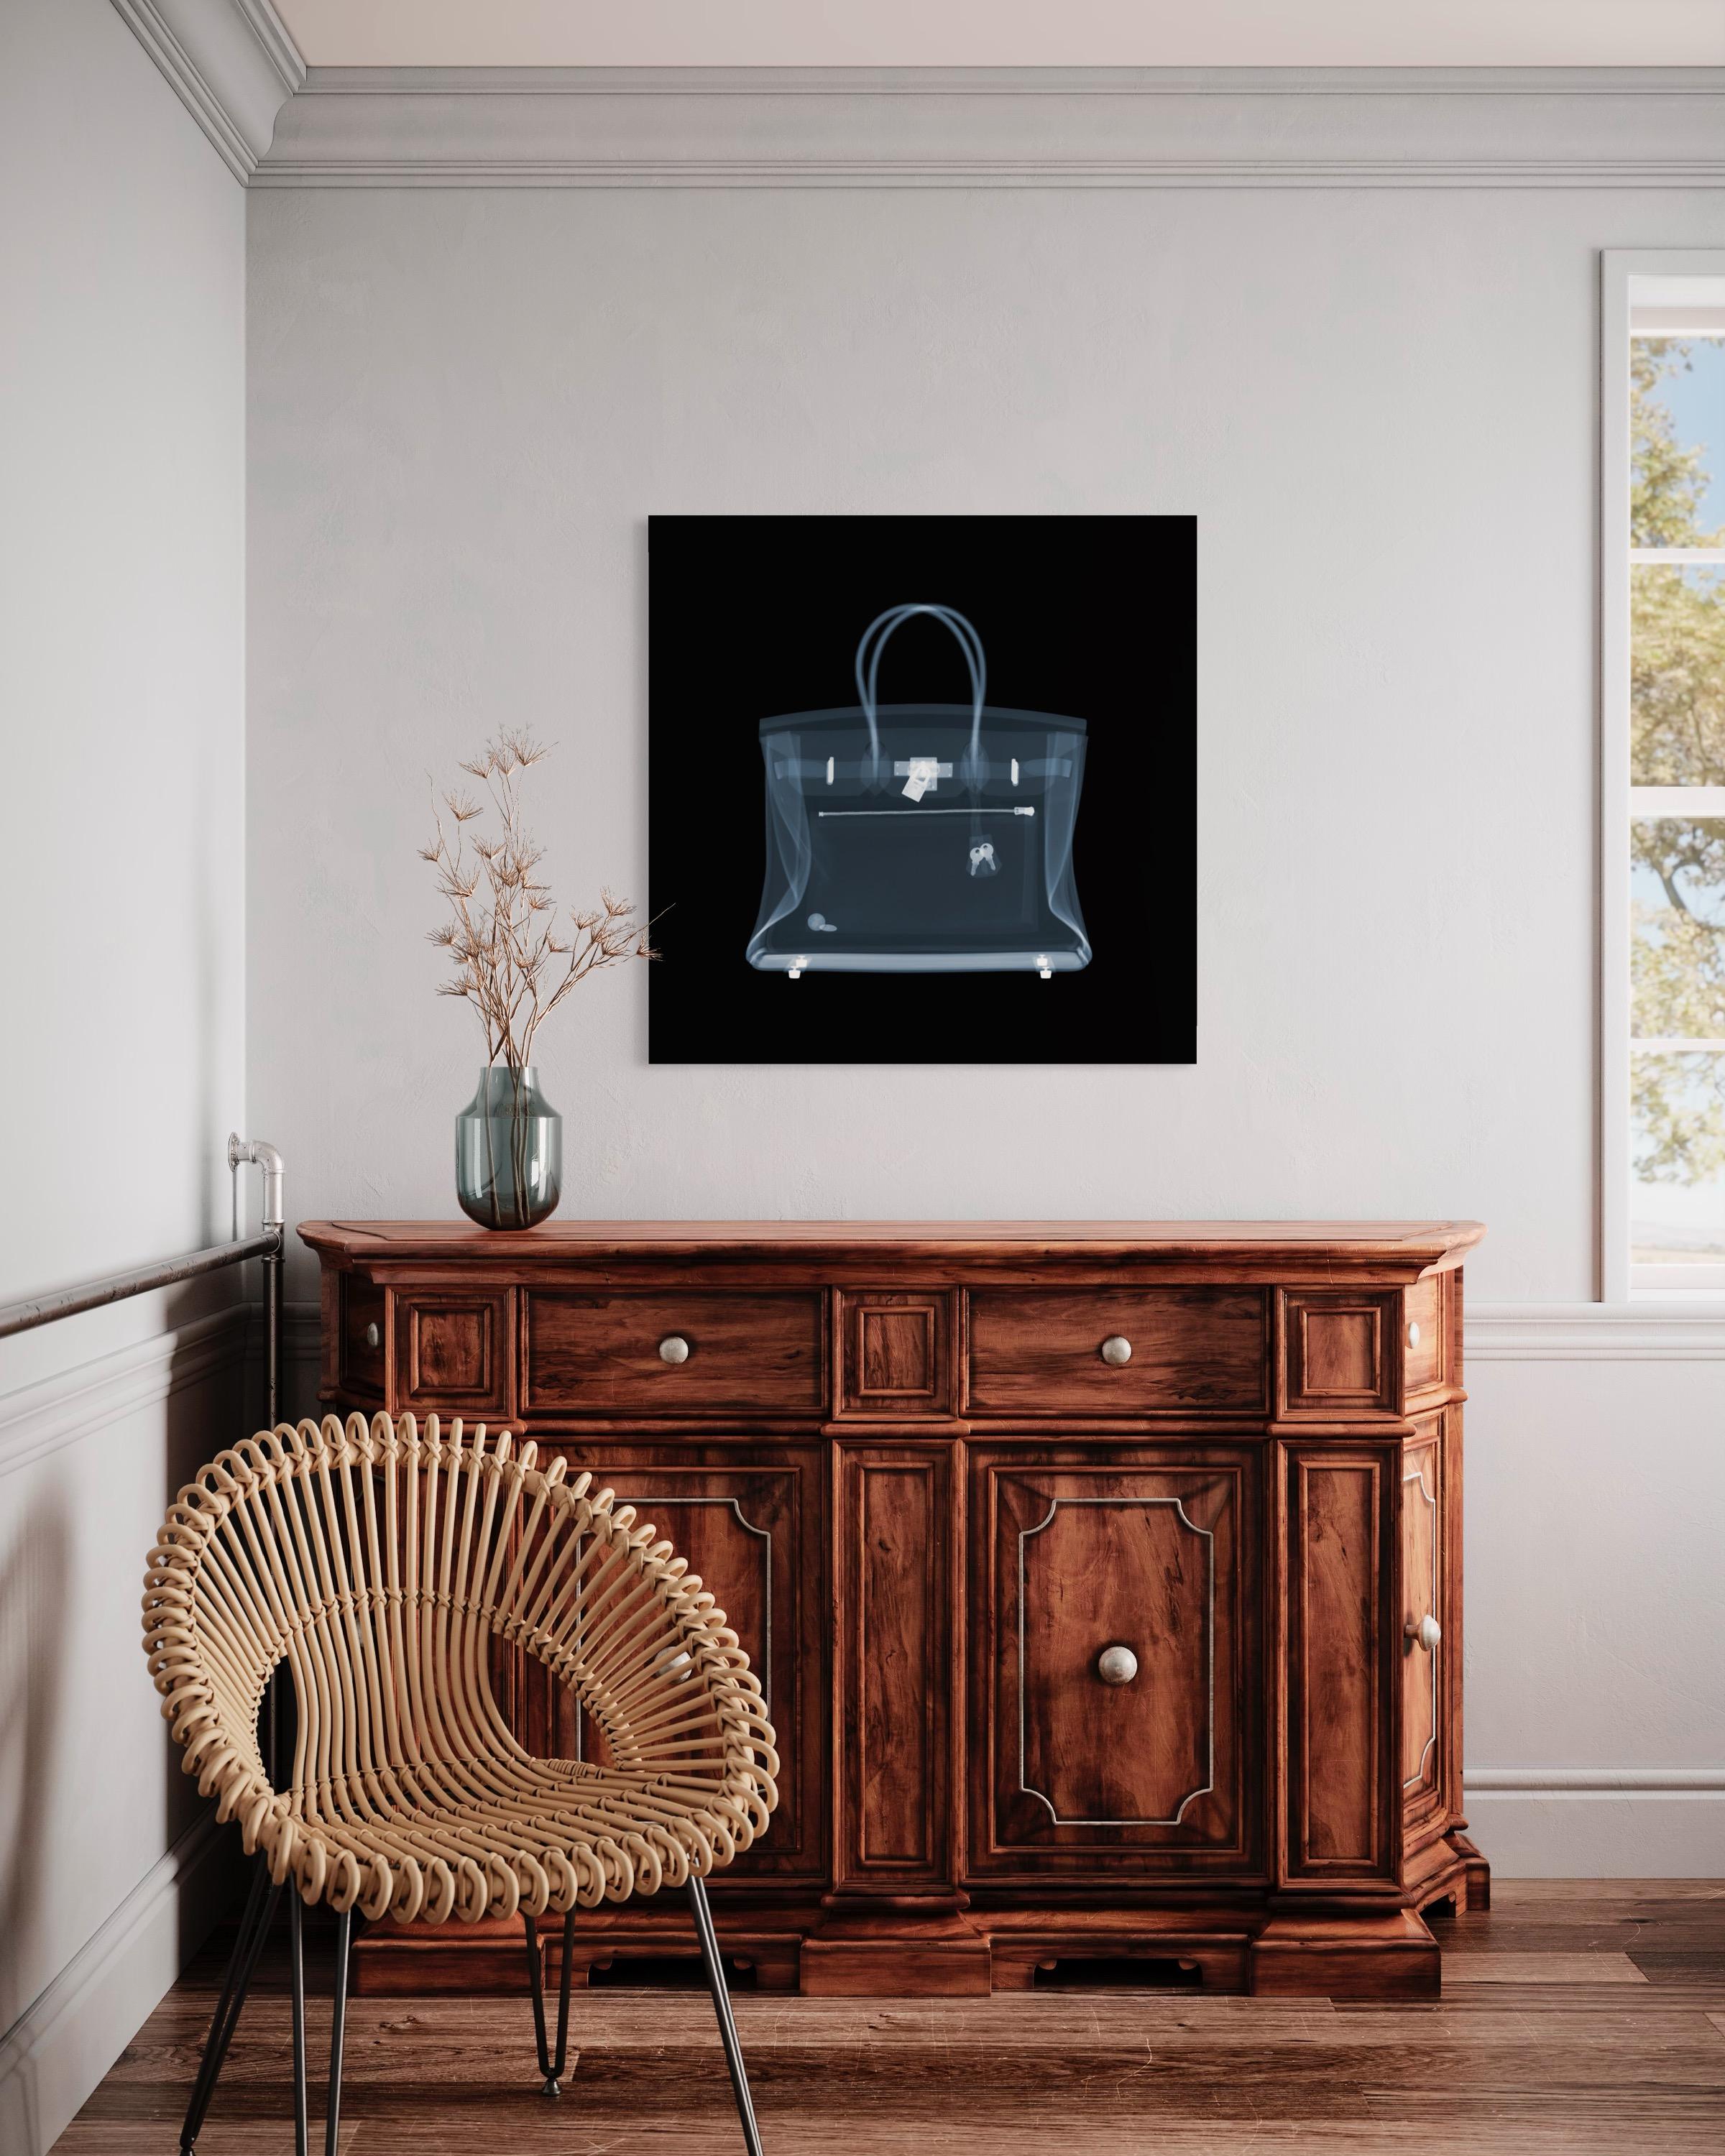 Hermes Birkin Bag  - Contemporary Photograph by Nick Veasey